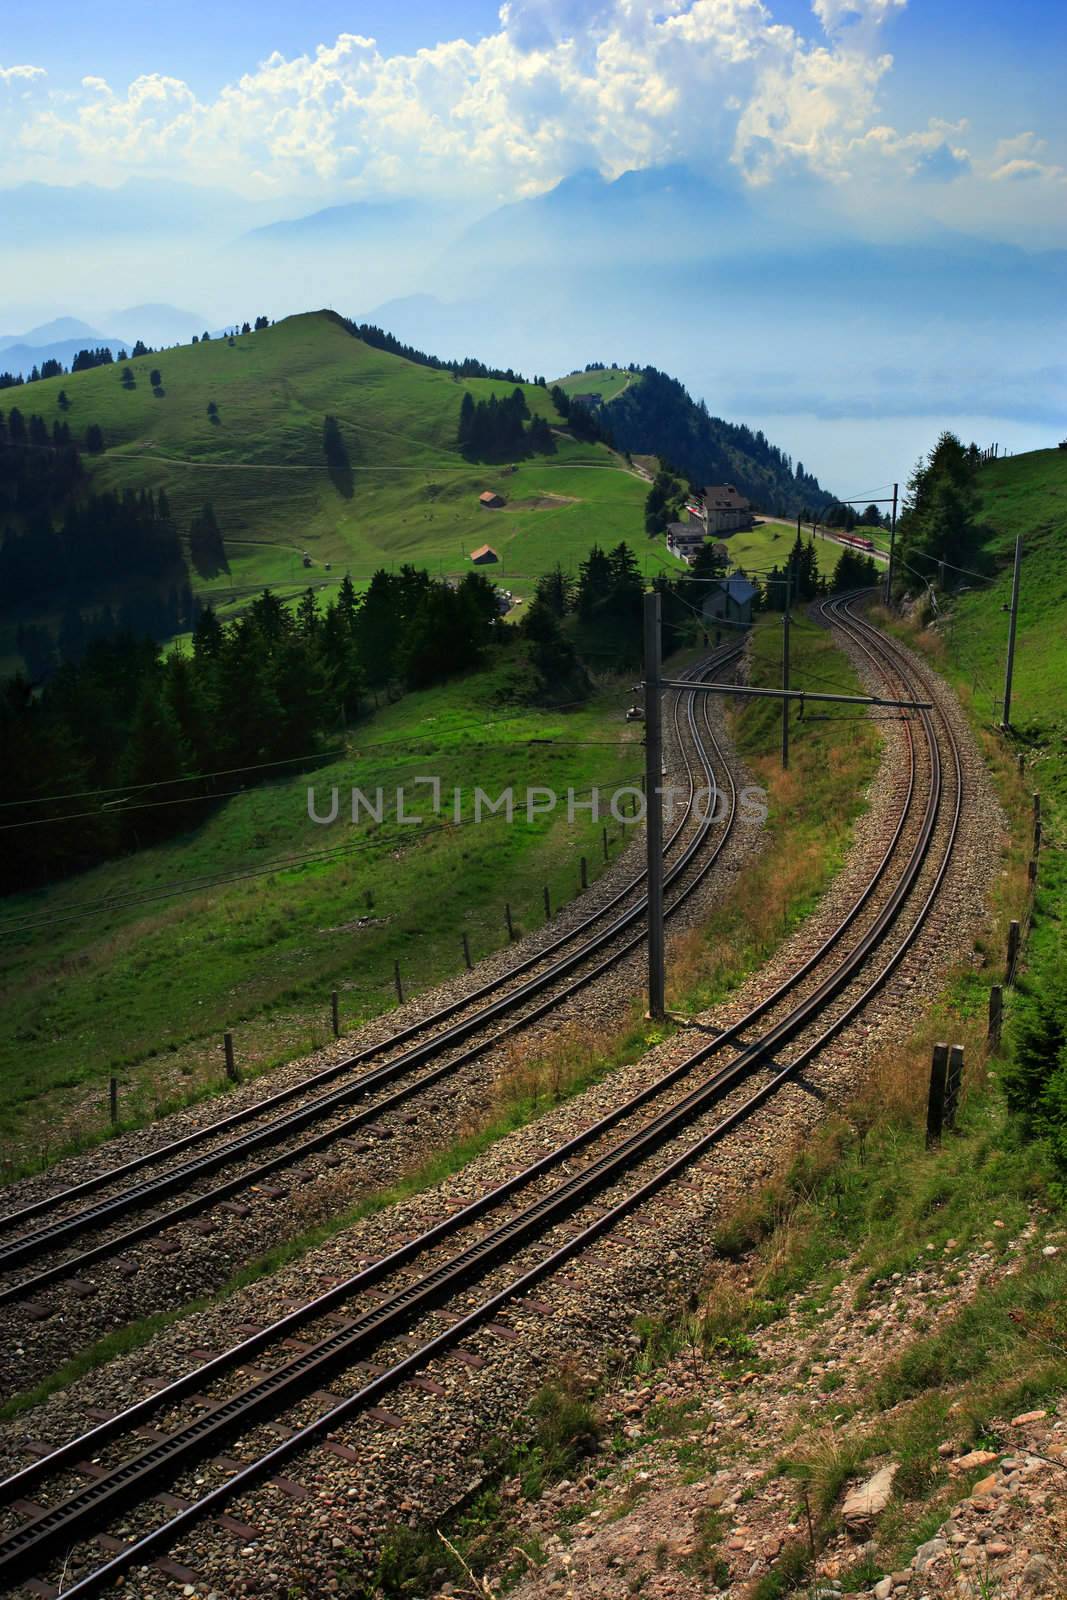 The winding tram tracks on Rigi mountain in Switzerland.  In the distance through the haze and clouds is a lake and more Alps.
